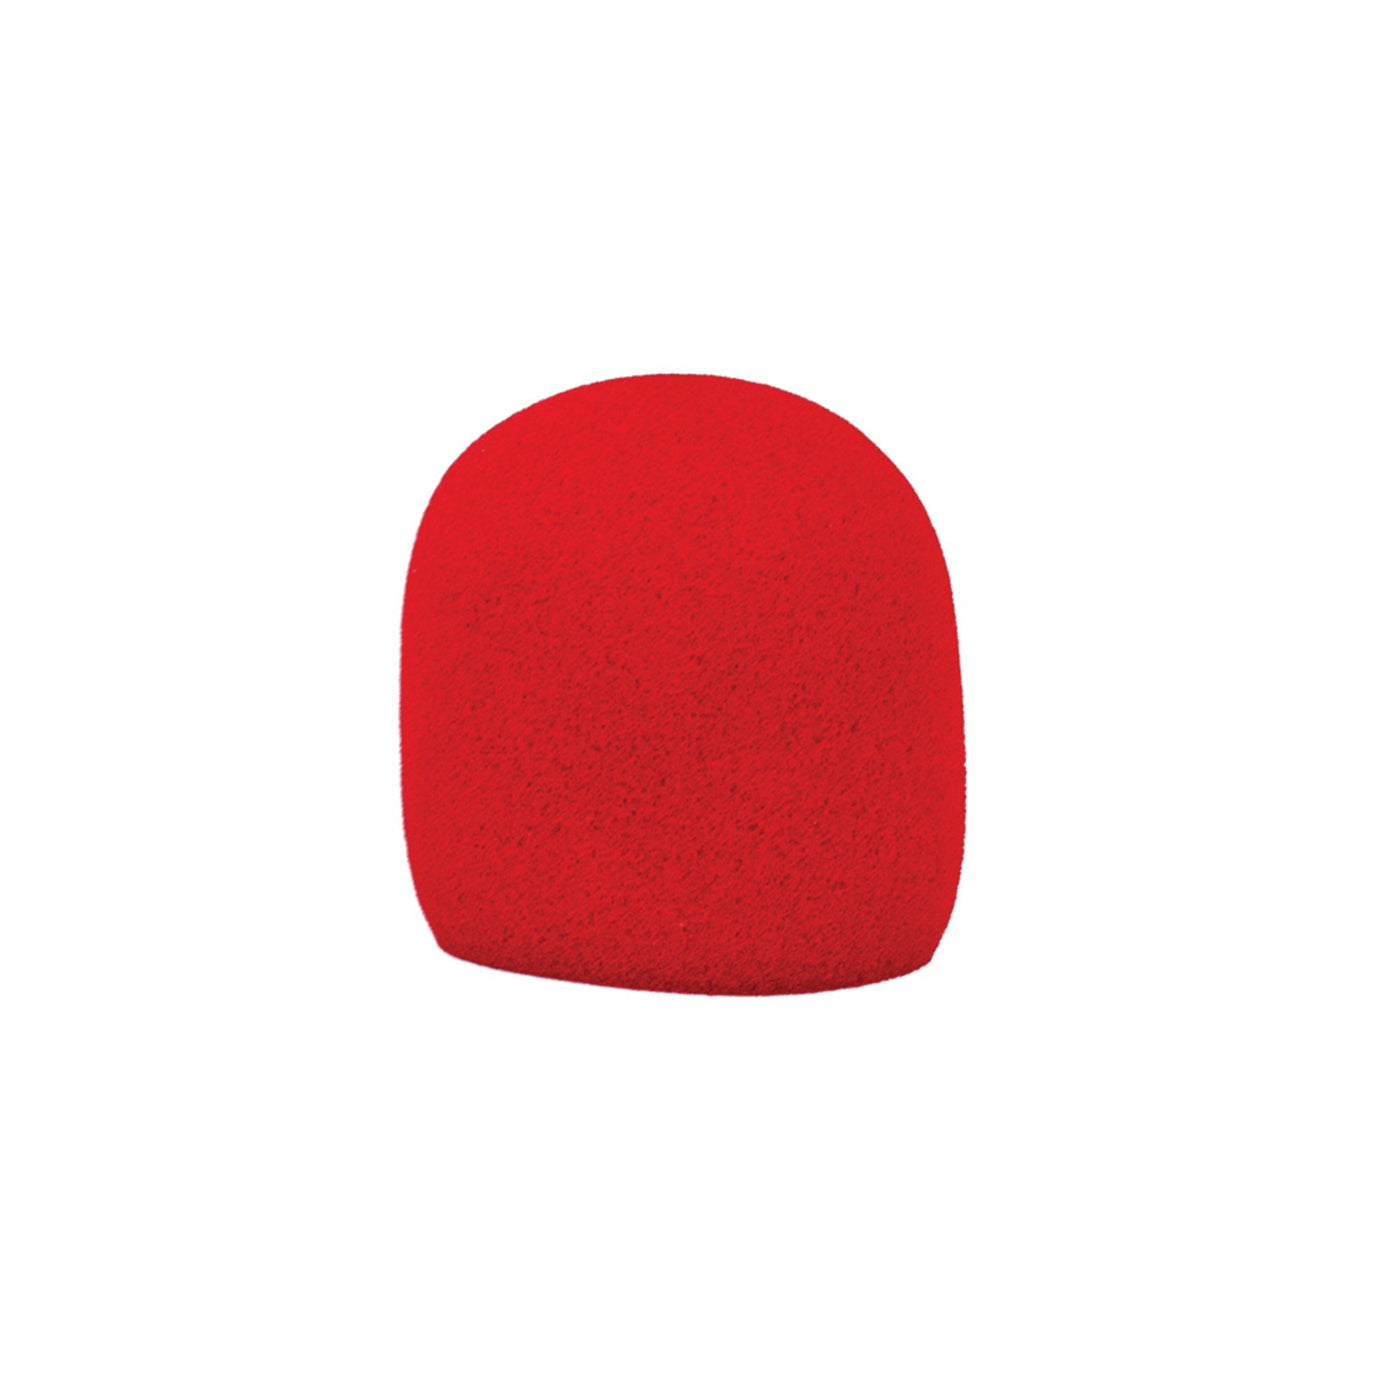 Nomad Microphone Wind Screen for Round Ball, Red (NMW-J01R)